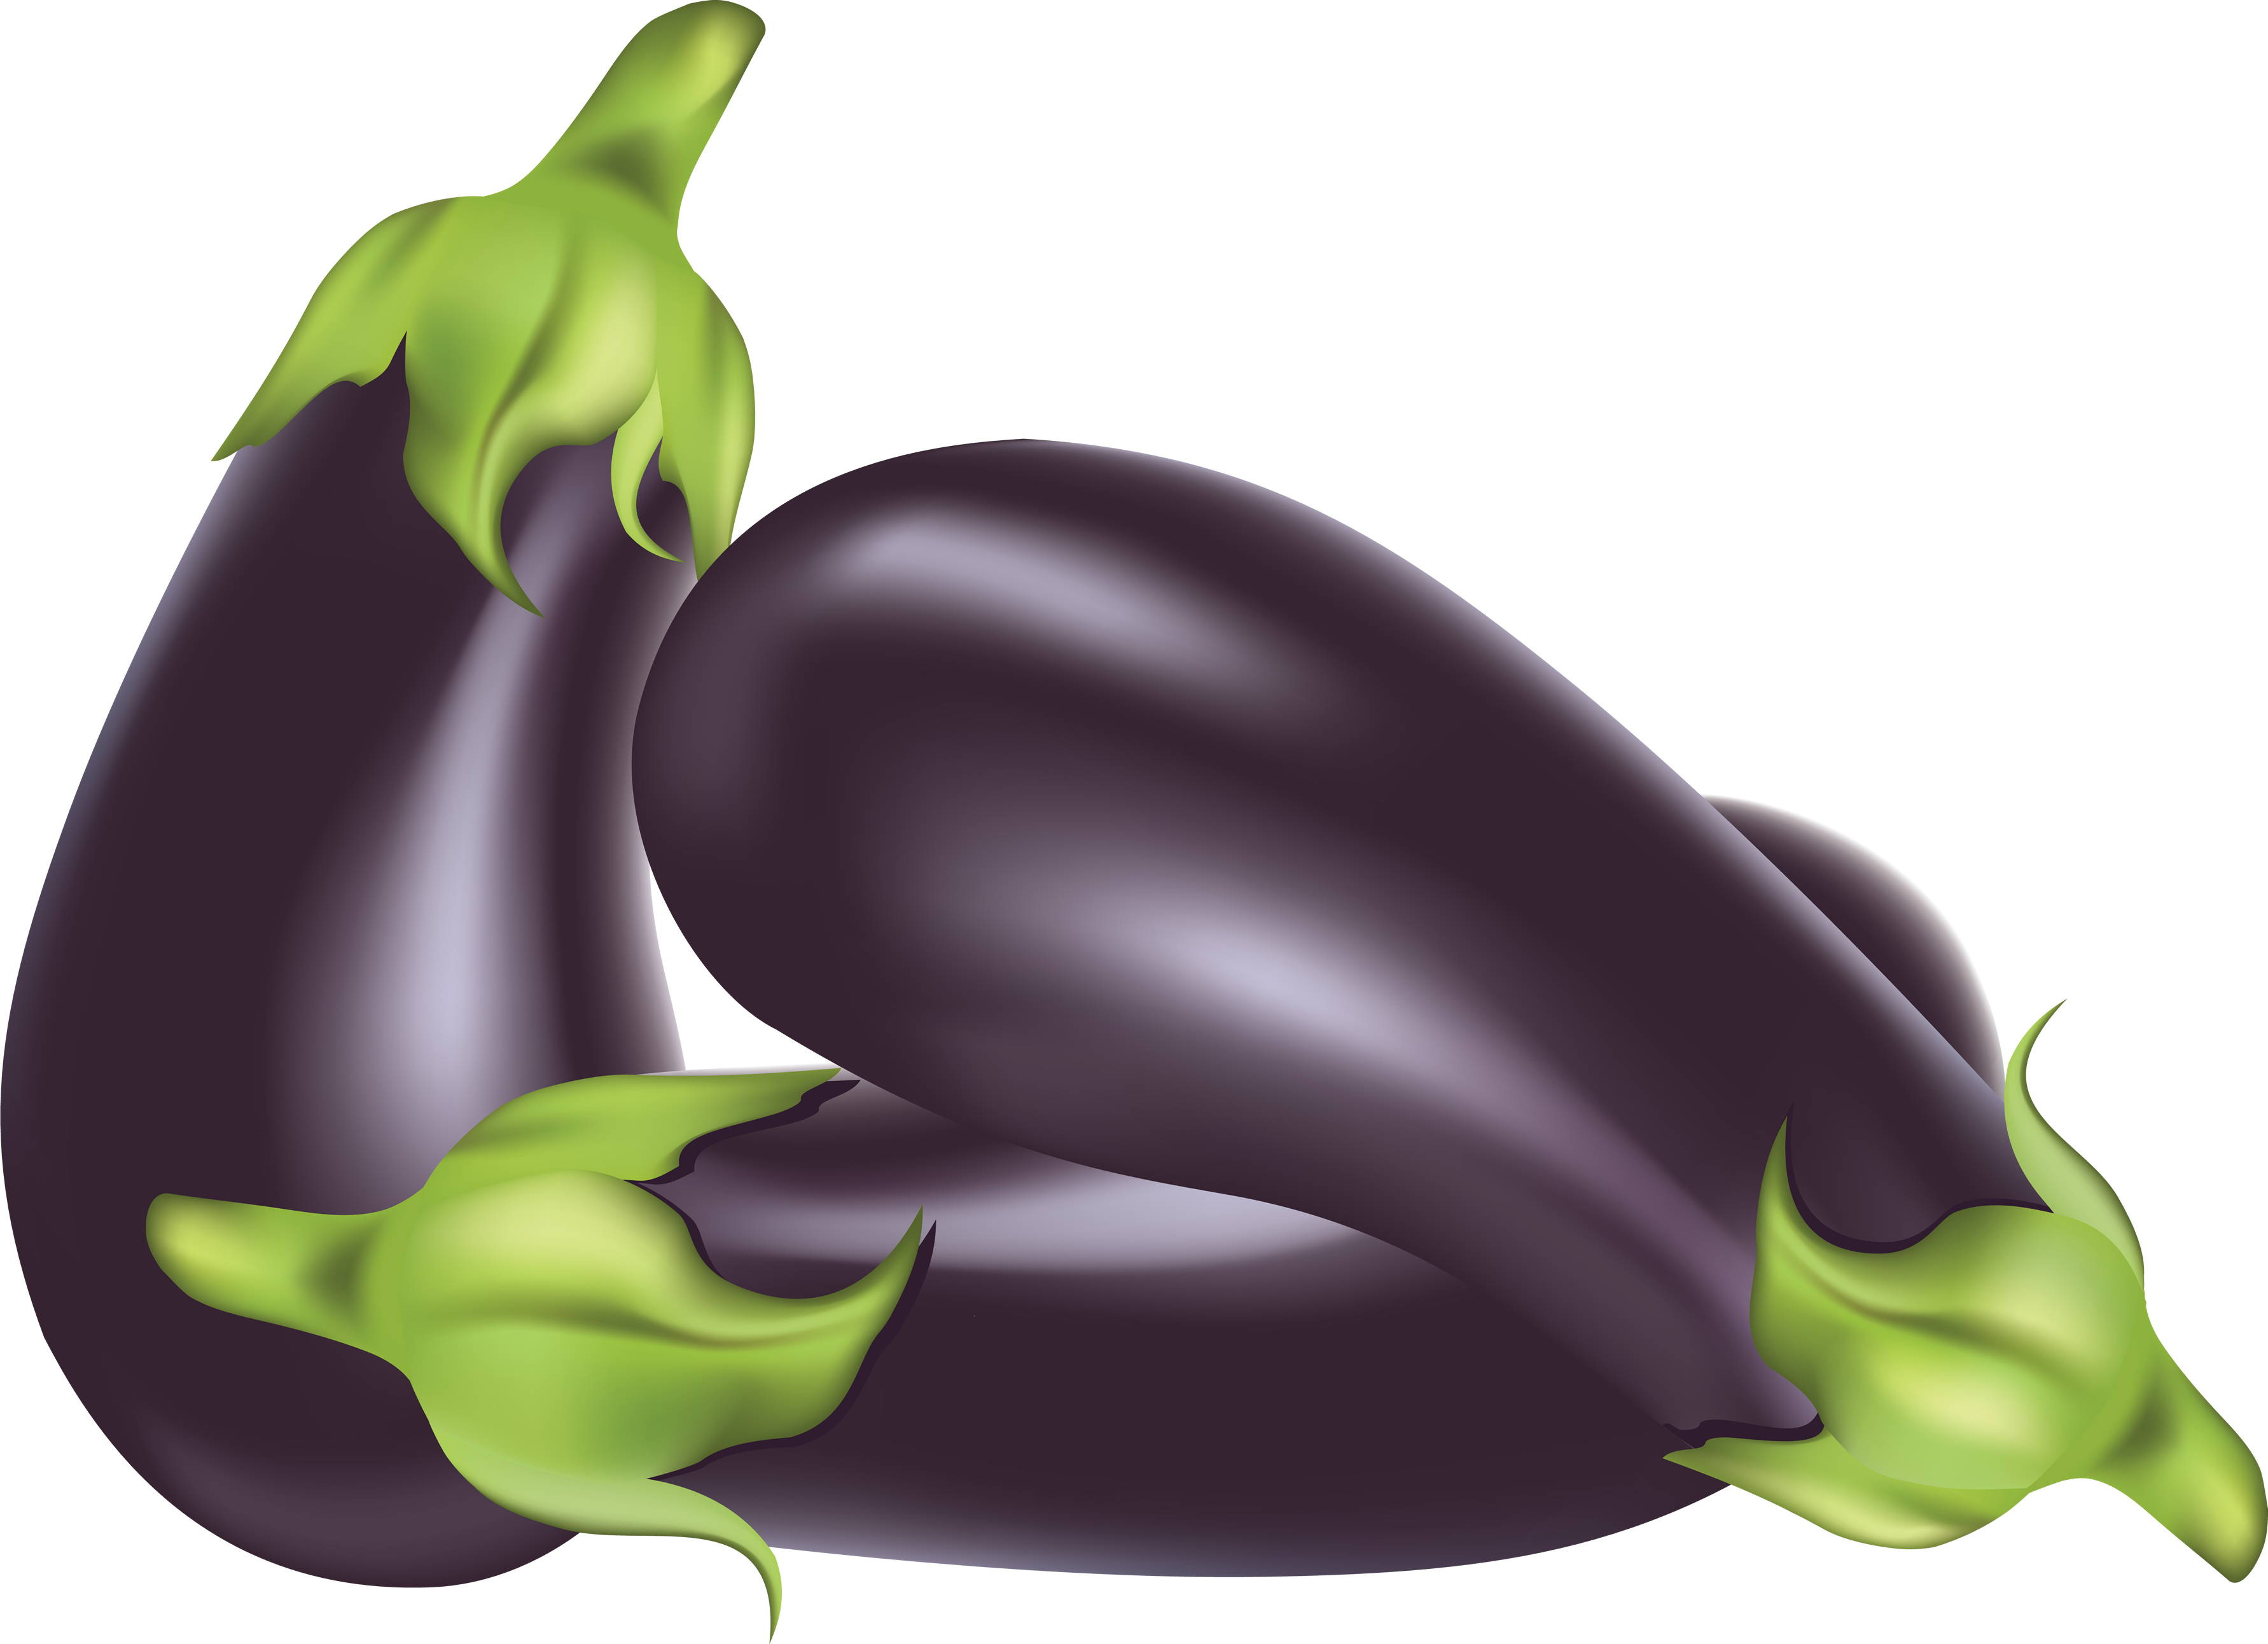 Brinjal Eggplant Bunch Free Clipart HD PNG Image